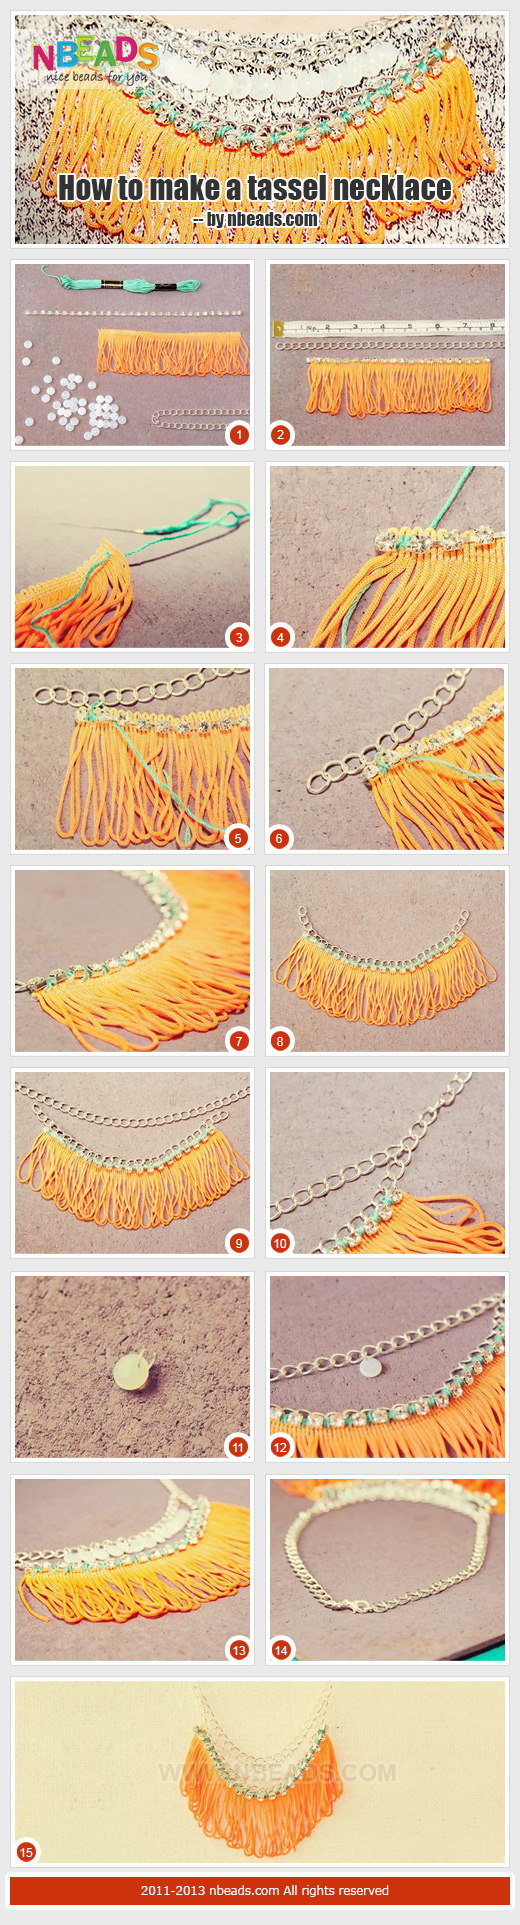 how to make a tassel necklace